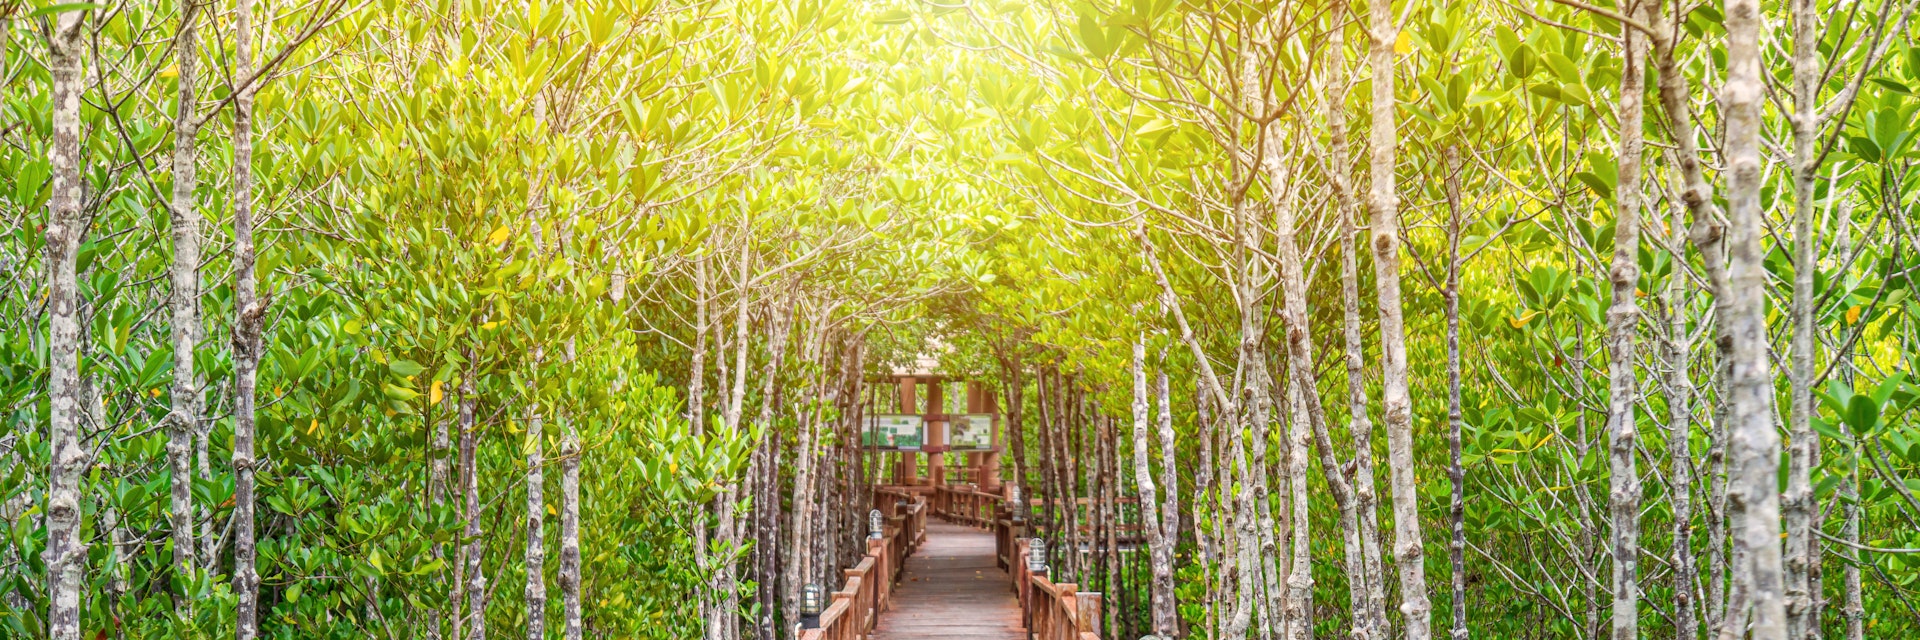 It is for nature walks to study coastal plants and animals in Thailand